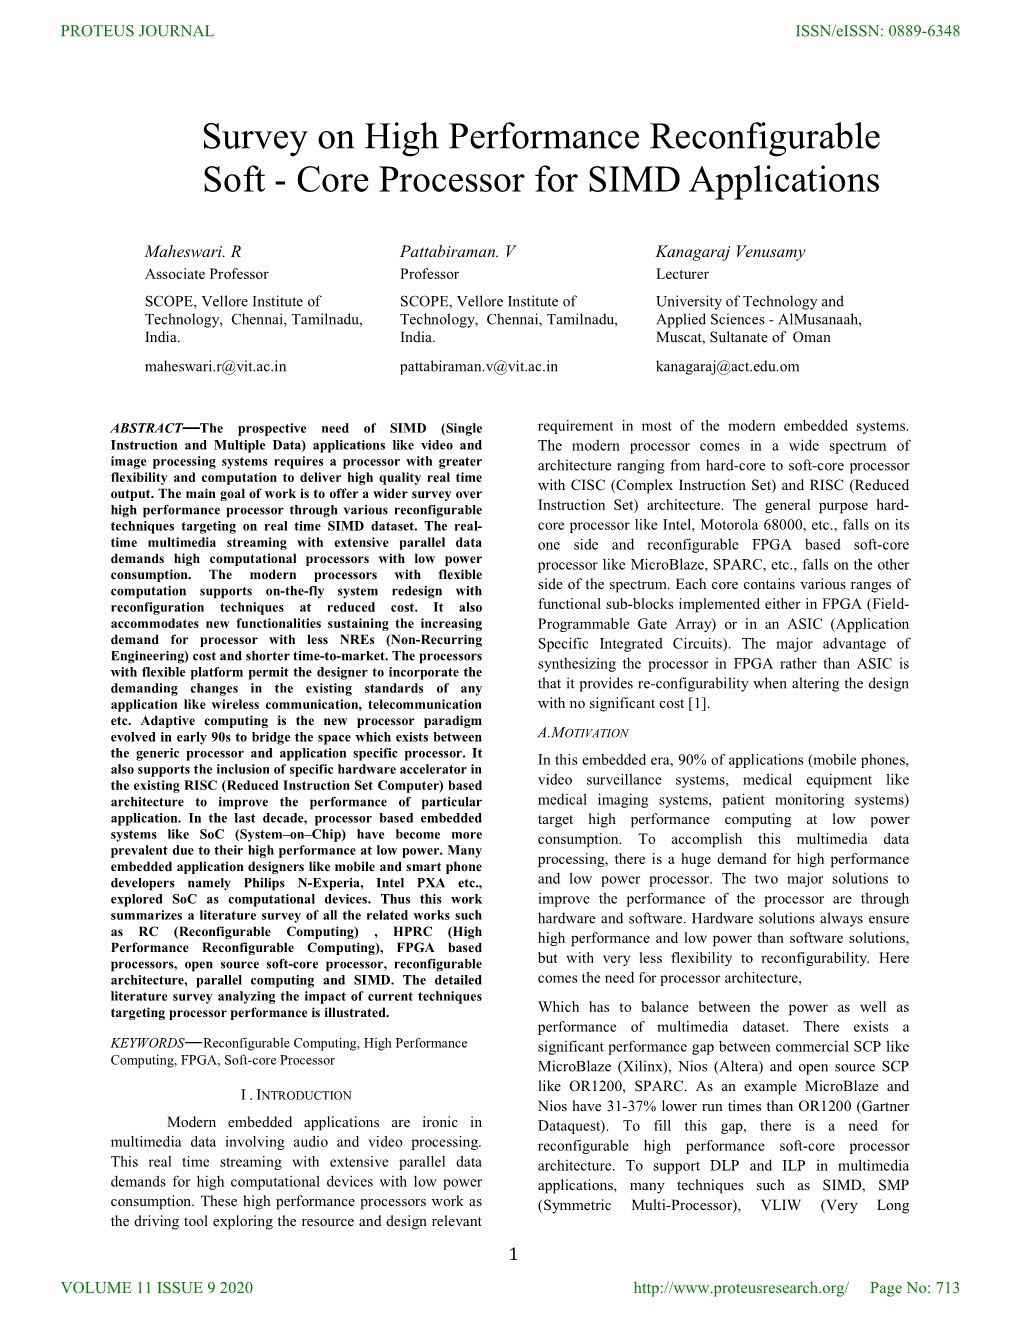 Survey on High Performance Reconfigurable Soft - Core Processor for SIMD Applications